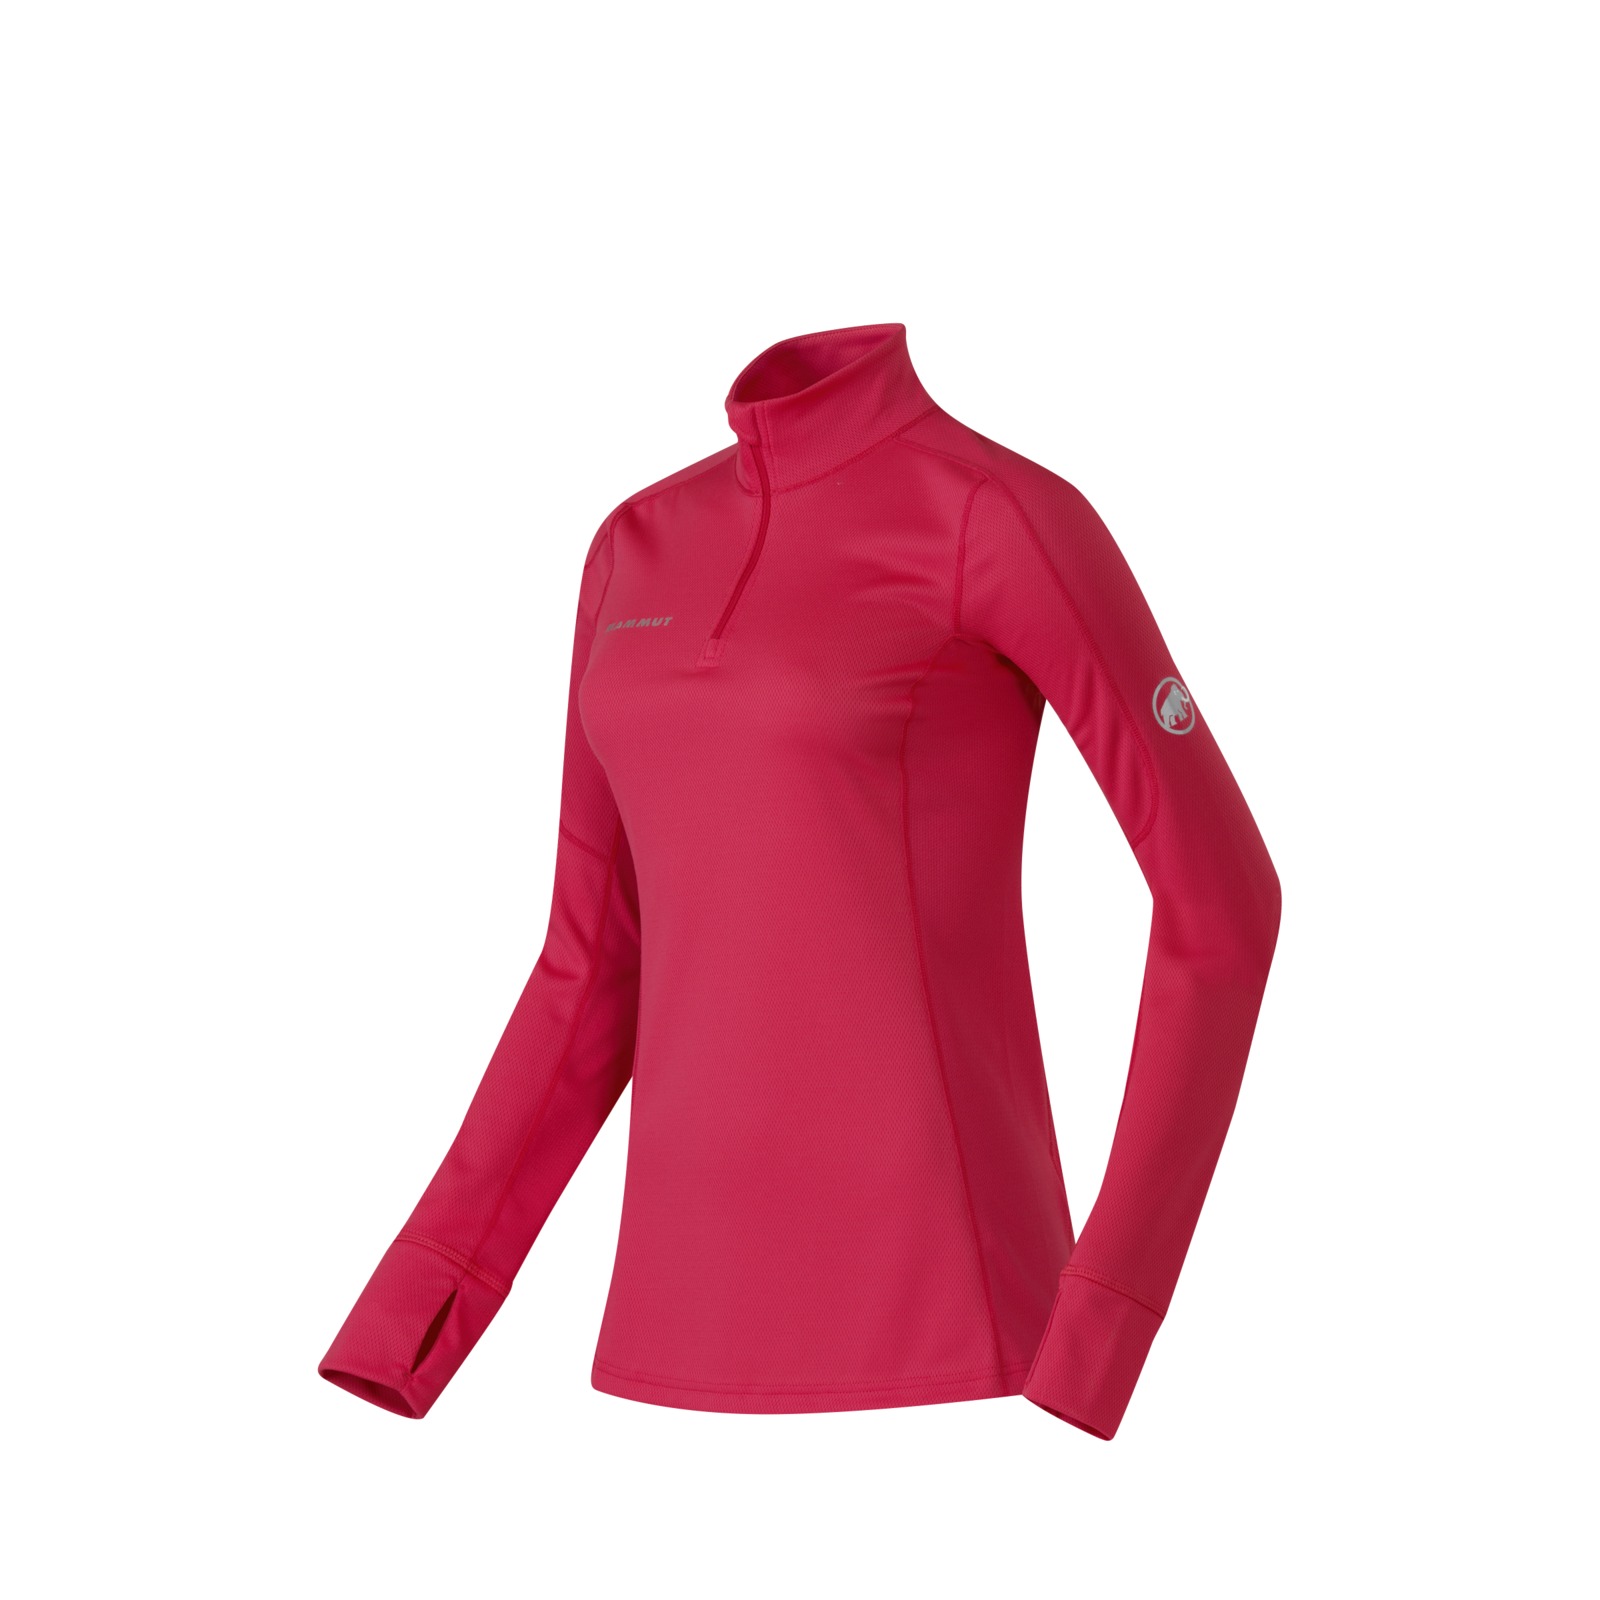 Piece of apparel made of smell proof fabric enhanced with sustainable odor control technology HeiQ Fresh